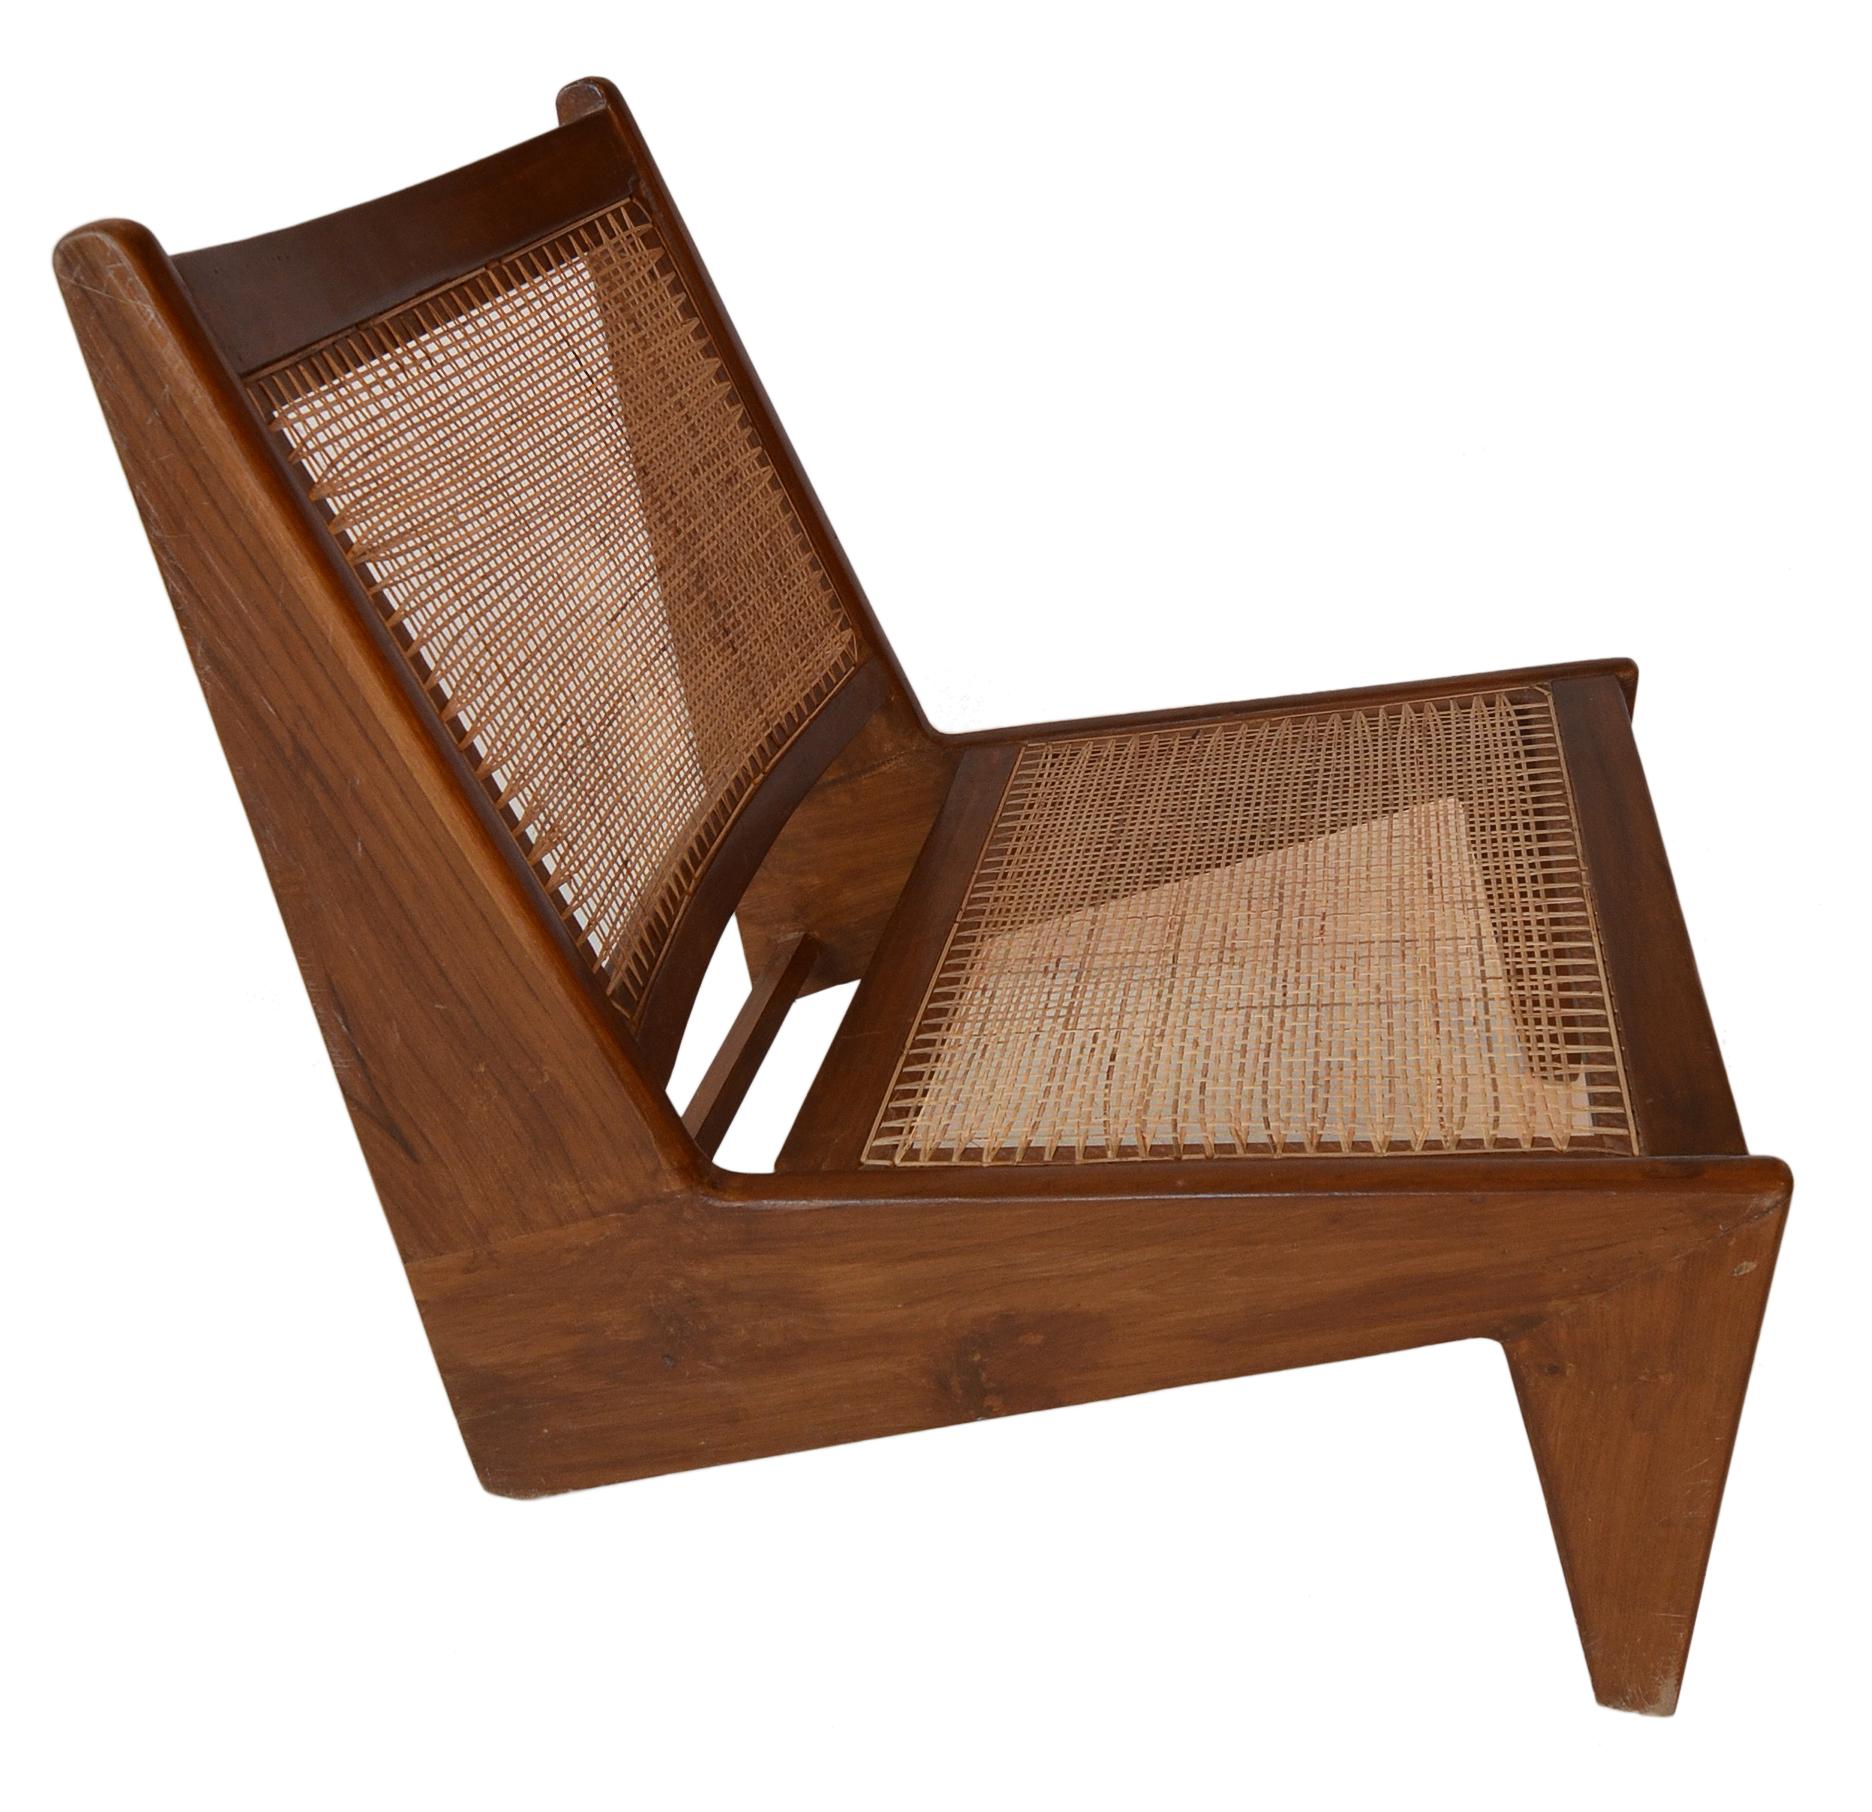 Mid-Century Modern Kangaroo Chairs by Pierre Jeanneret for the Chandigarh Project